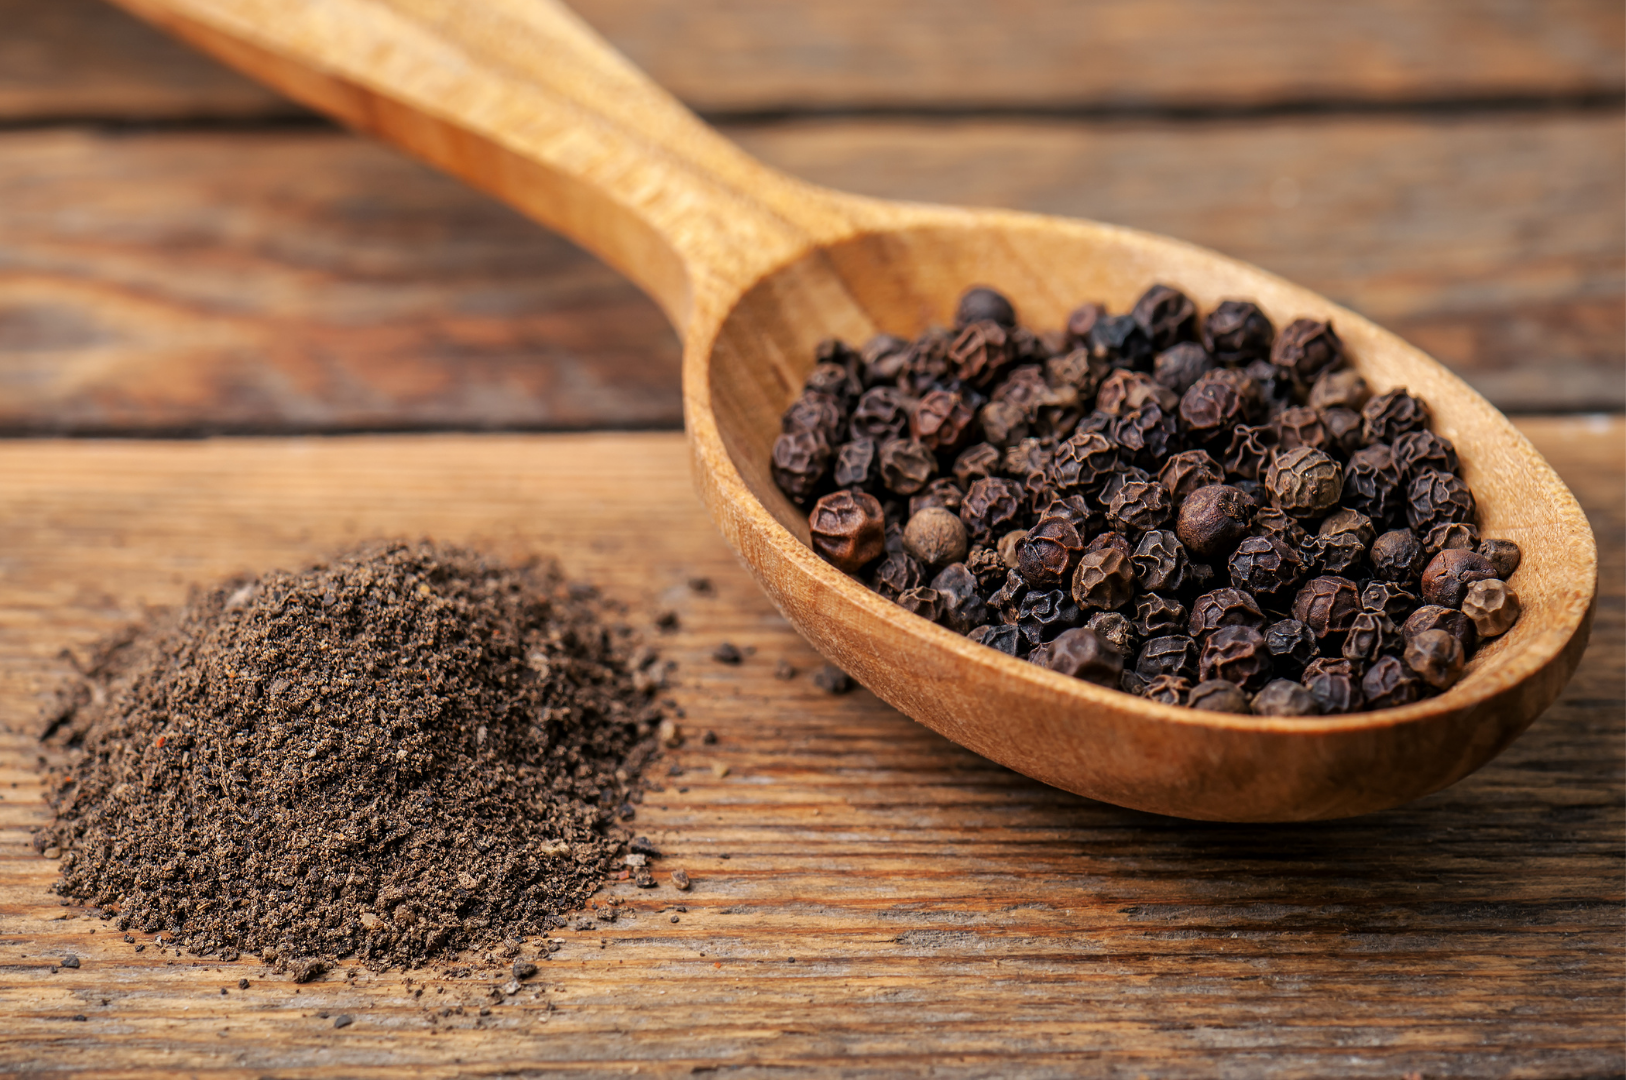 VIDEO: Black Pepper and Hair Health: Benefits, Growth Studies, and More